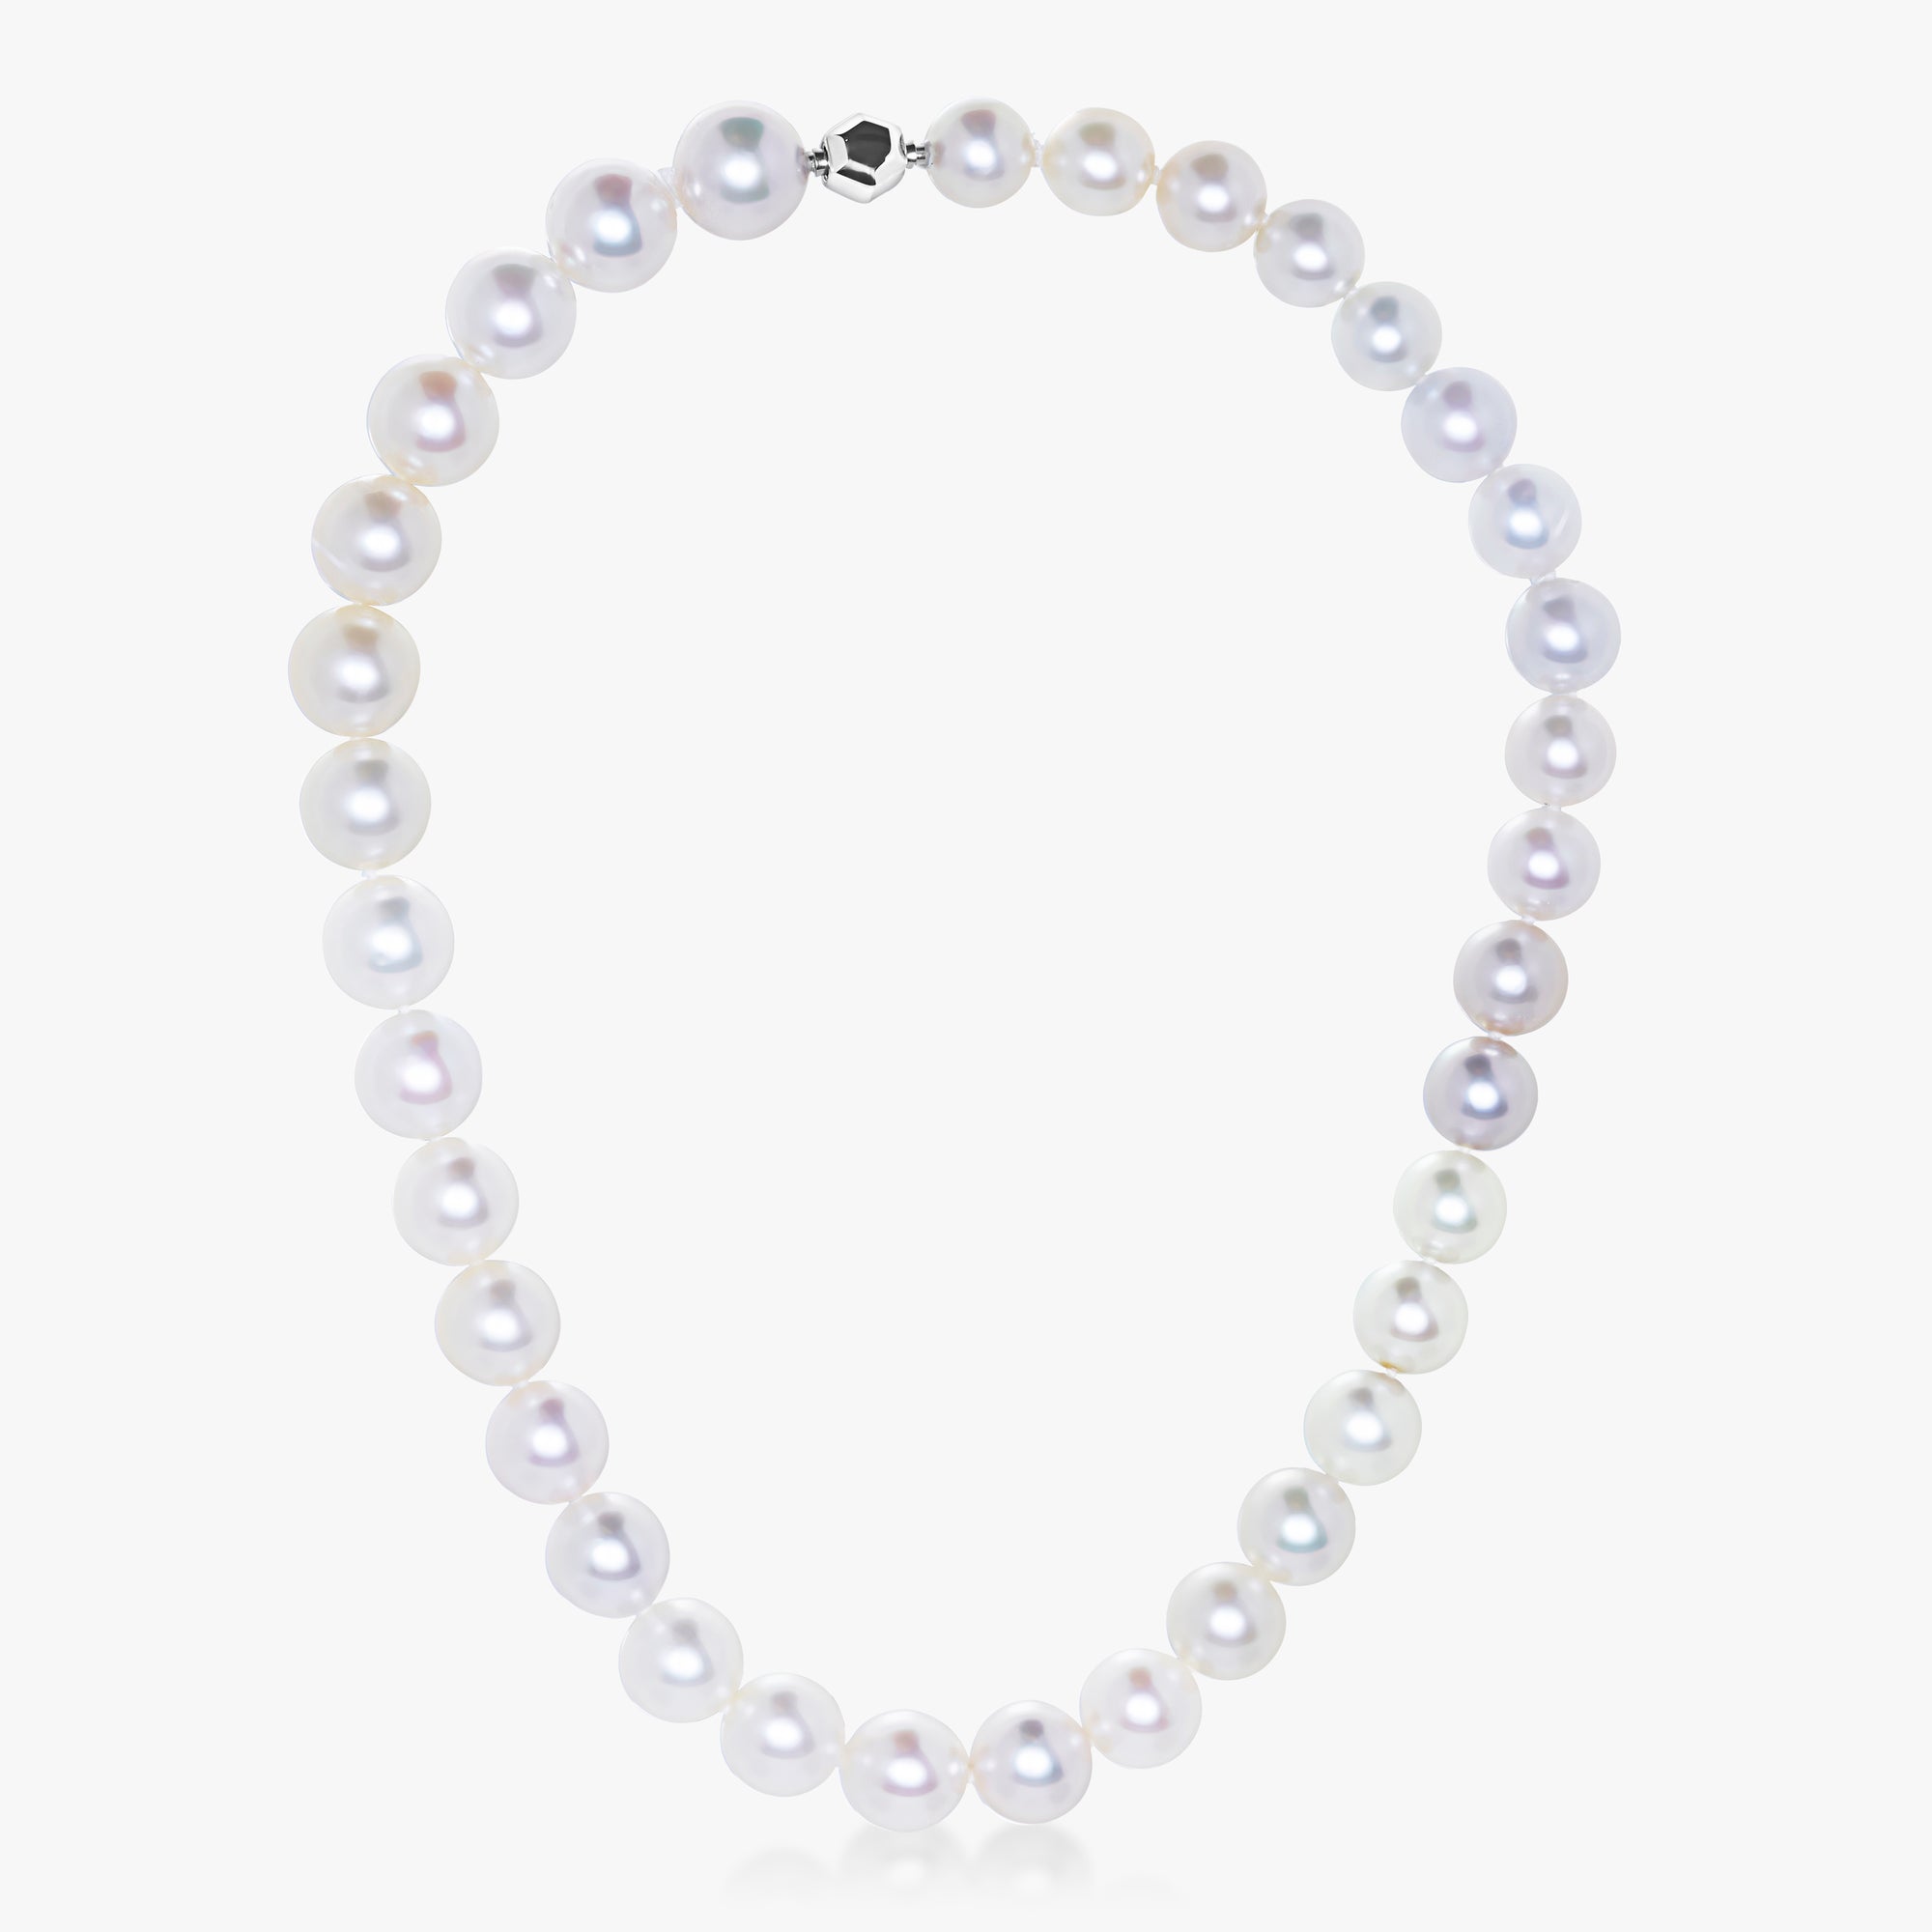 South Sea Graduated Pearl Necklace 10mm 16-inch - Carrie K. 